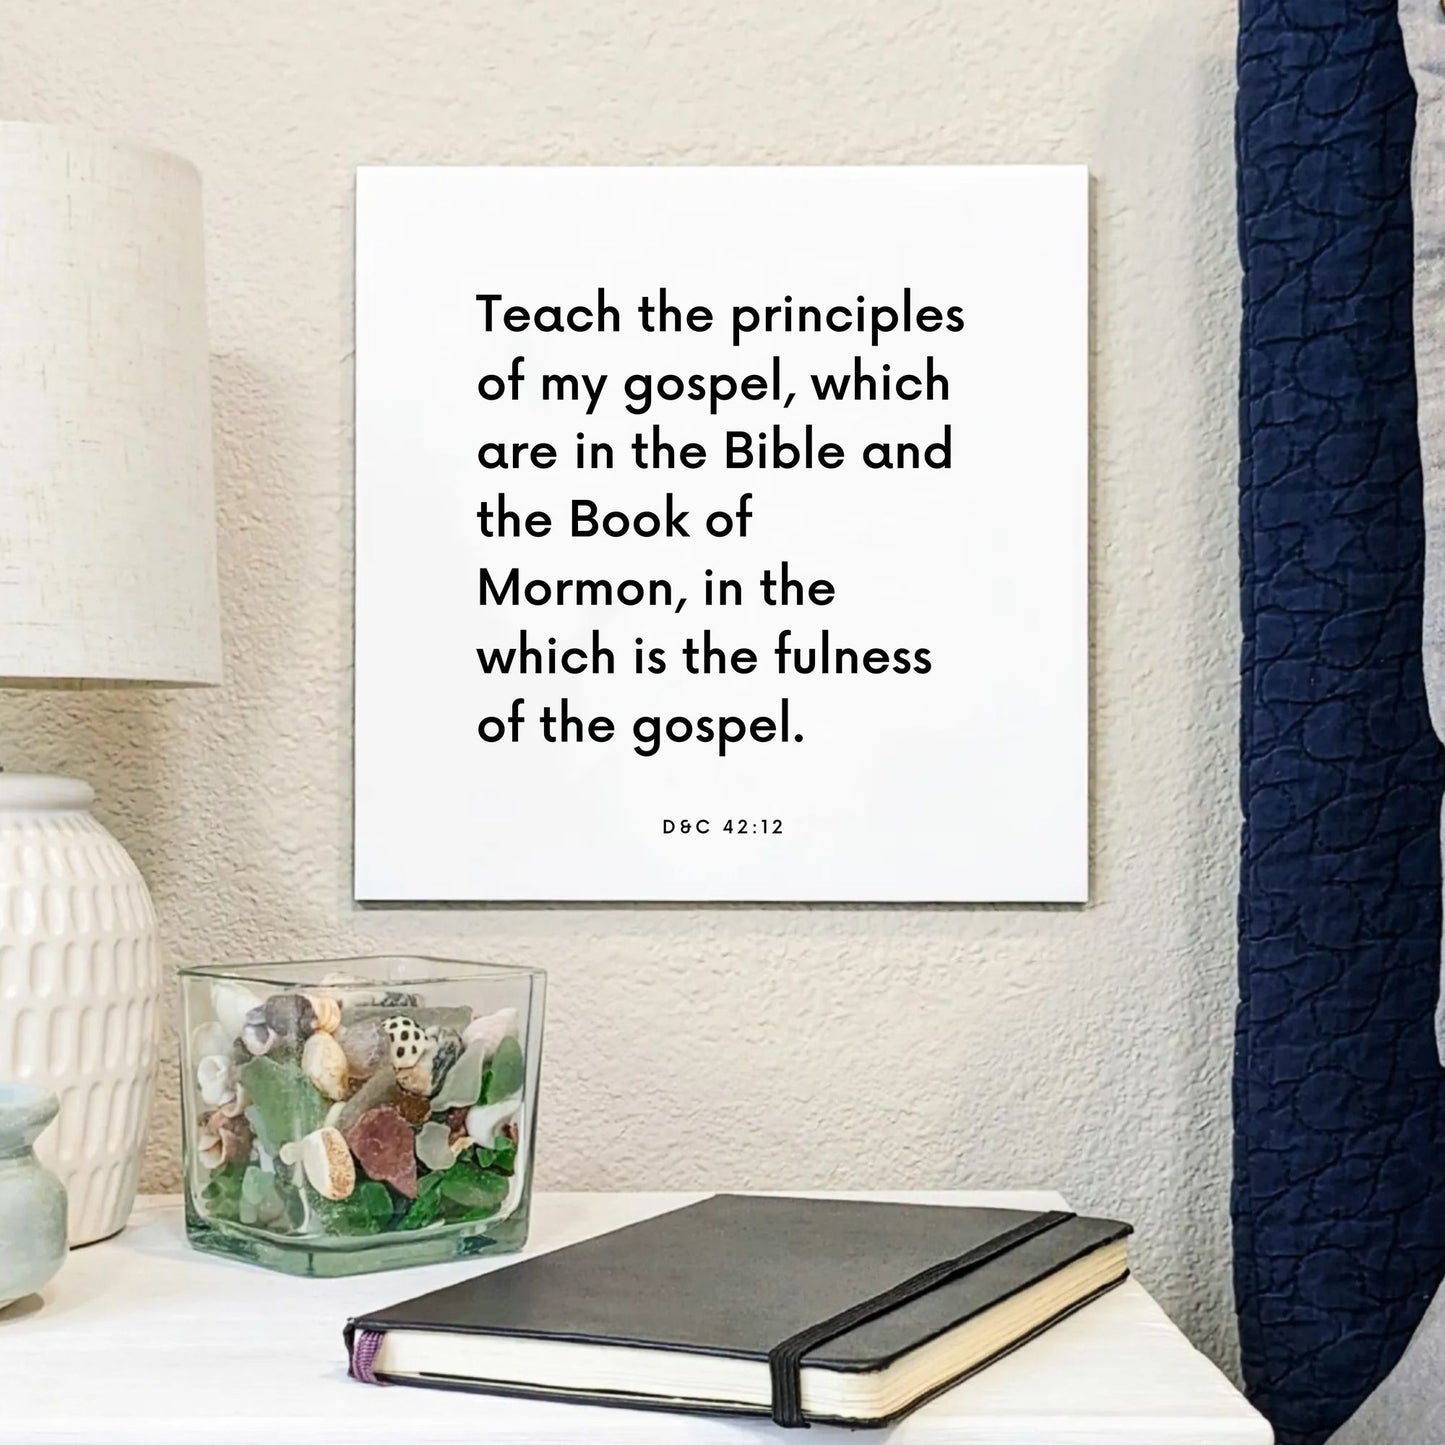 Bedside mouting of the scripture tile for D&C 42:12 - "In the which is the fulness of the gospel"